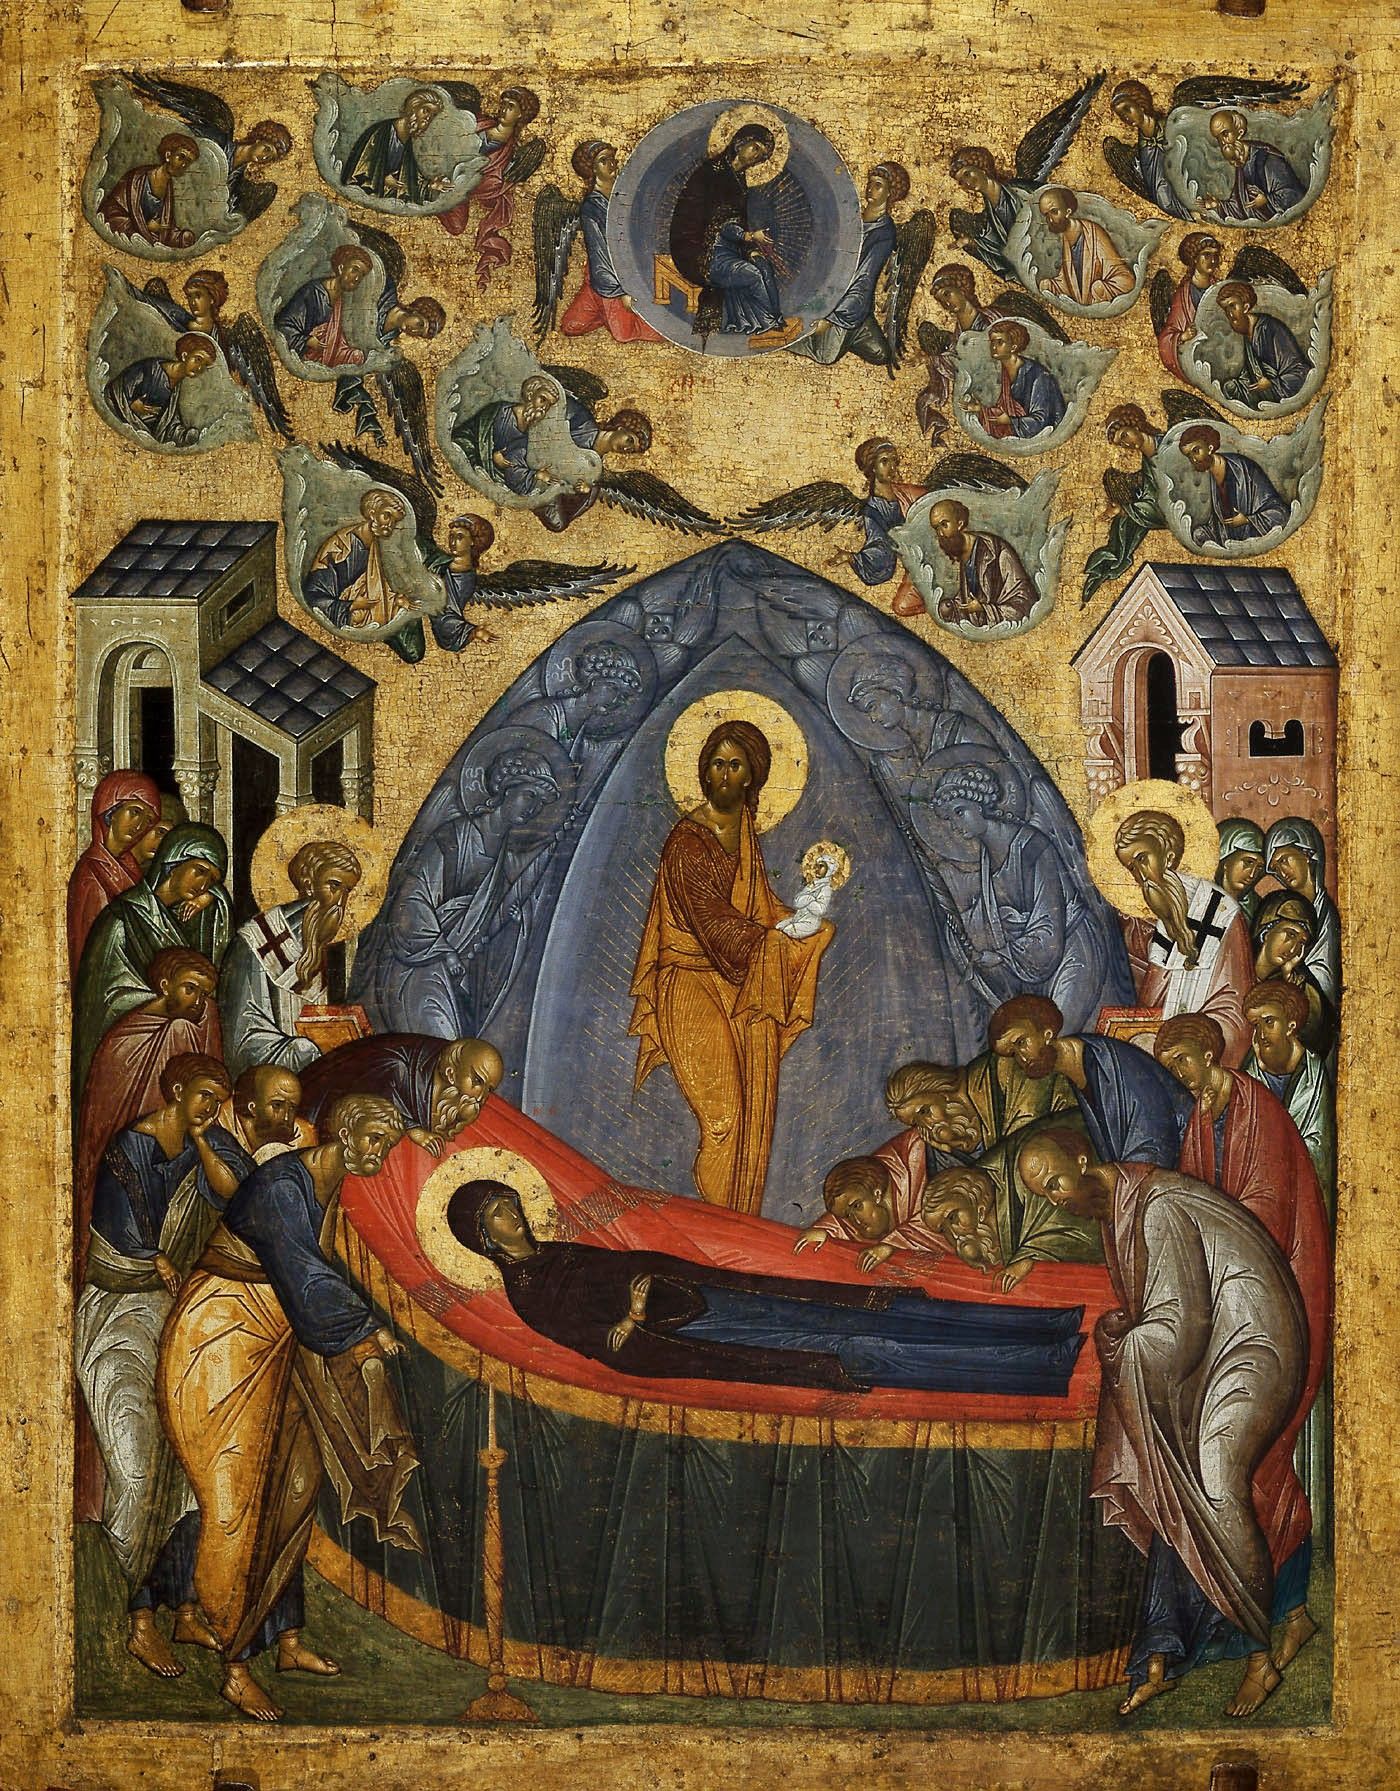 Painless, Blameless, and Peaceful - A Sermon for the Dormition of the Mother of God (2022)